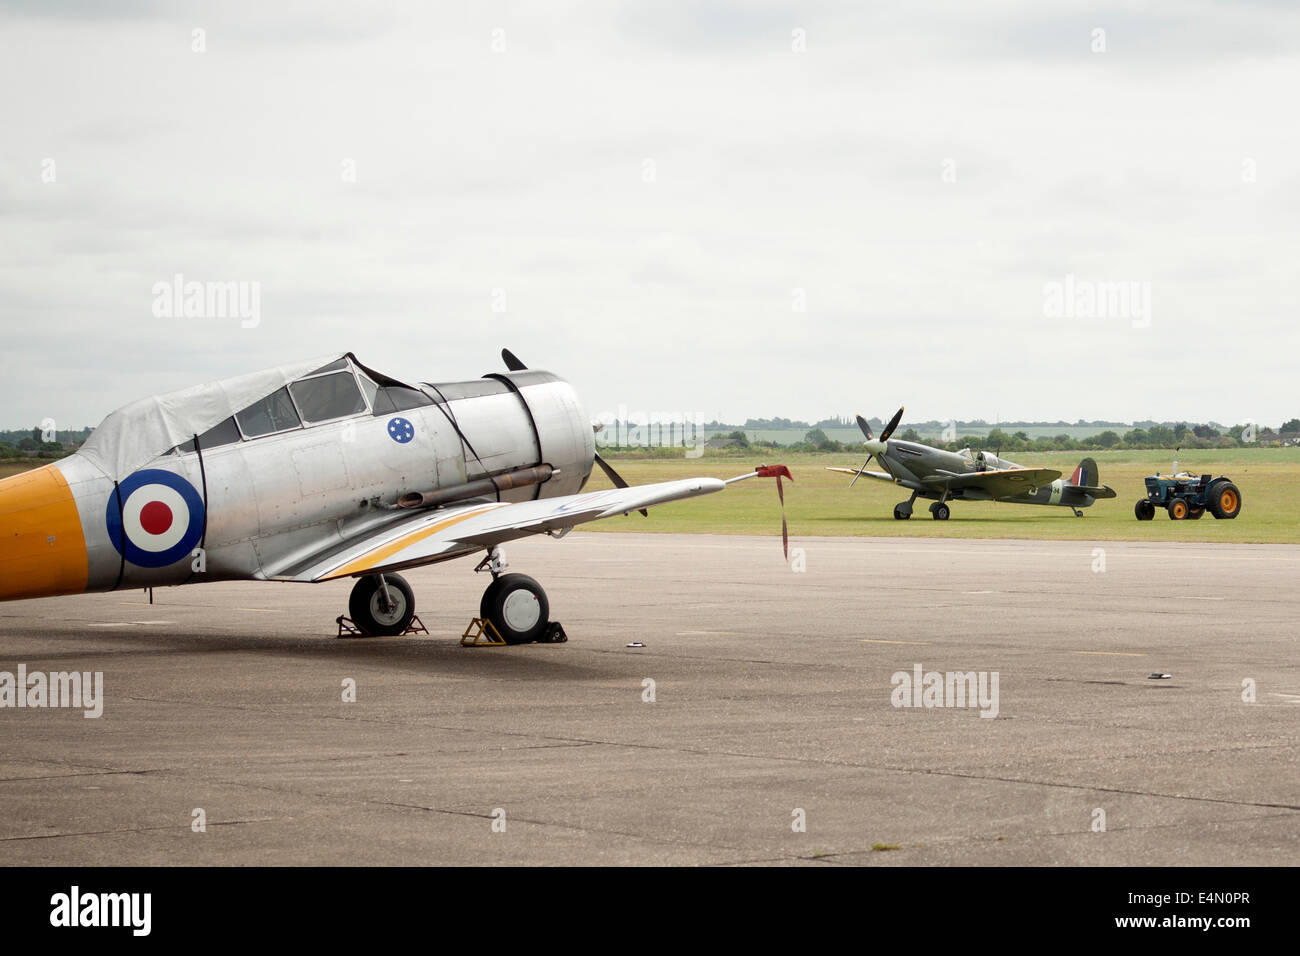 Harvard Trainer and Supermarine Spitfire on the edge of the runway at Duxford Imperial War Museum, United Kingdom Stock Photo